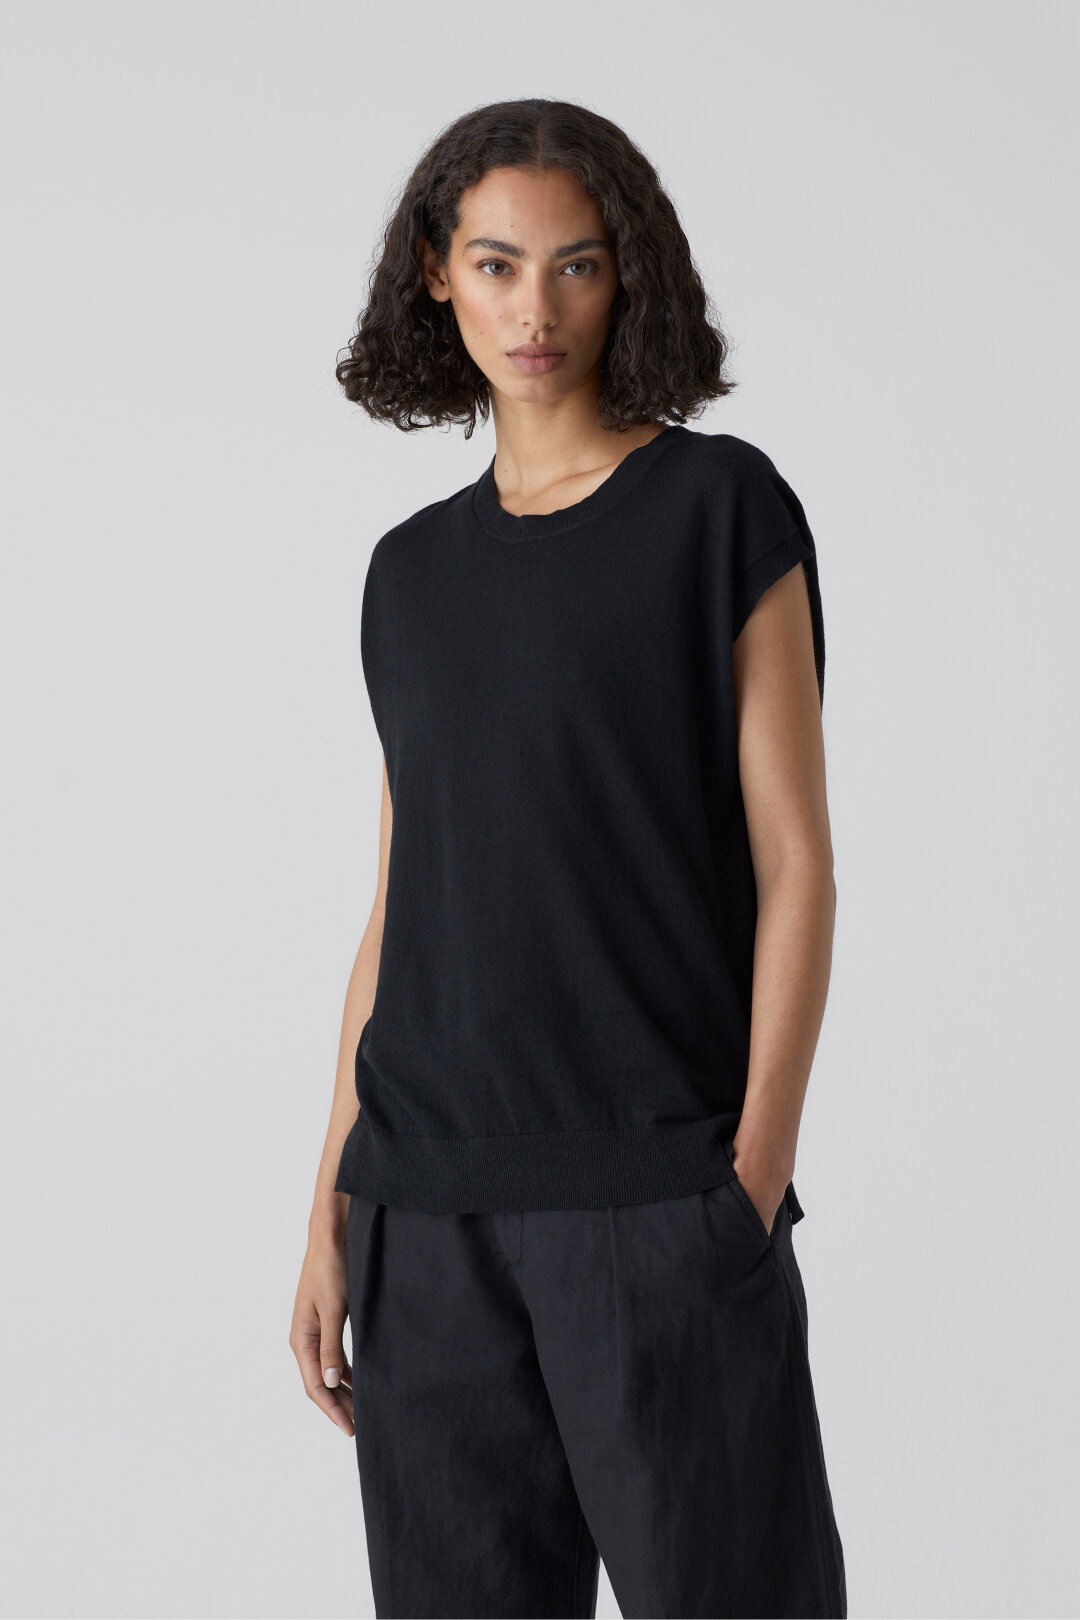 CLOSED Knitted Sleeveless Top in Black